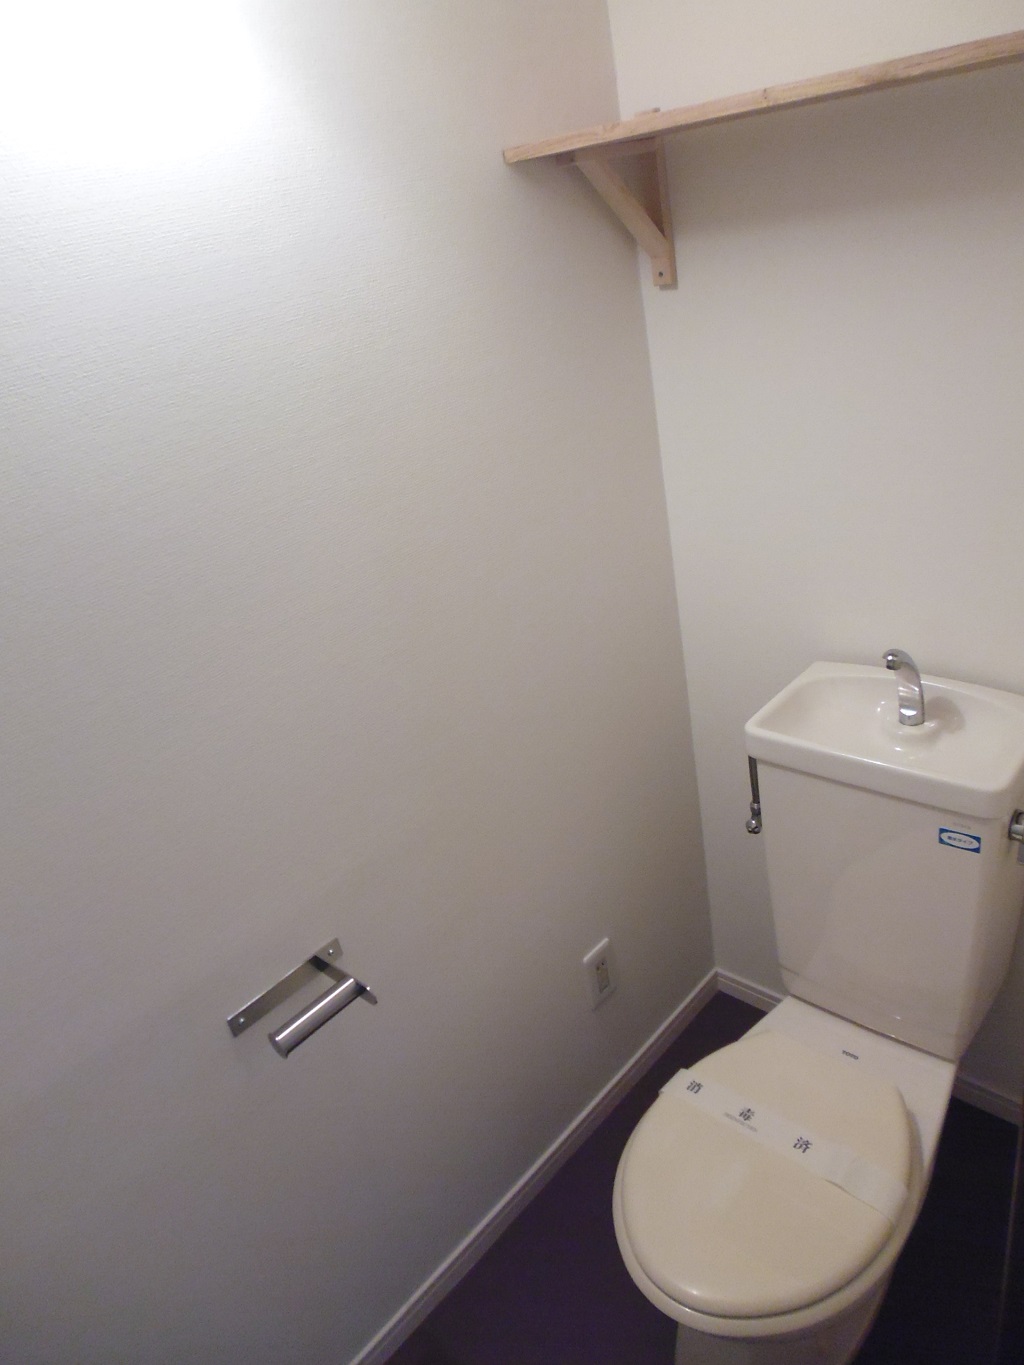 Toilet. It gives a calm space